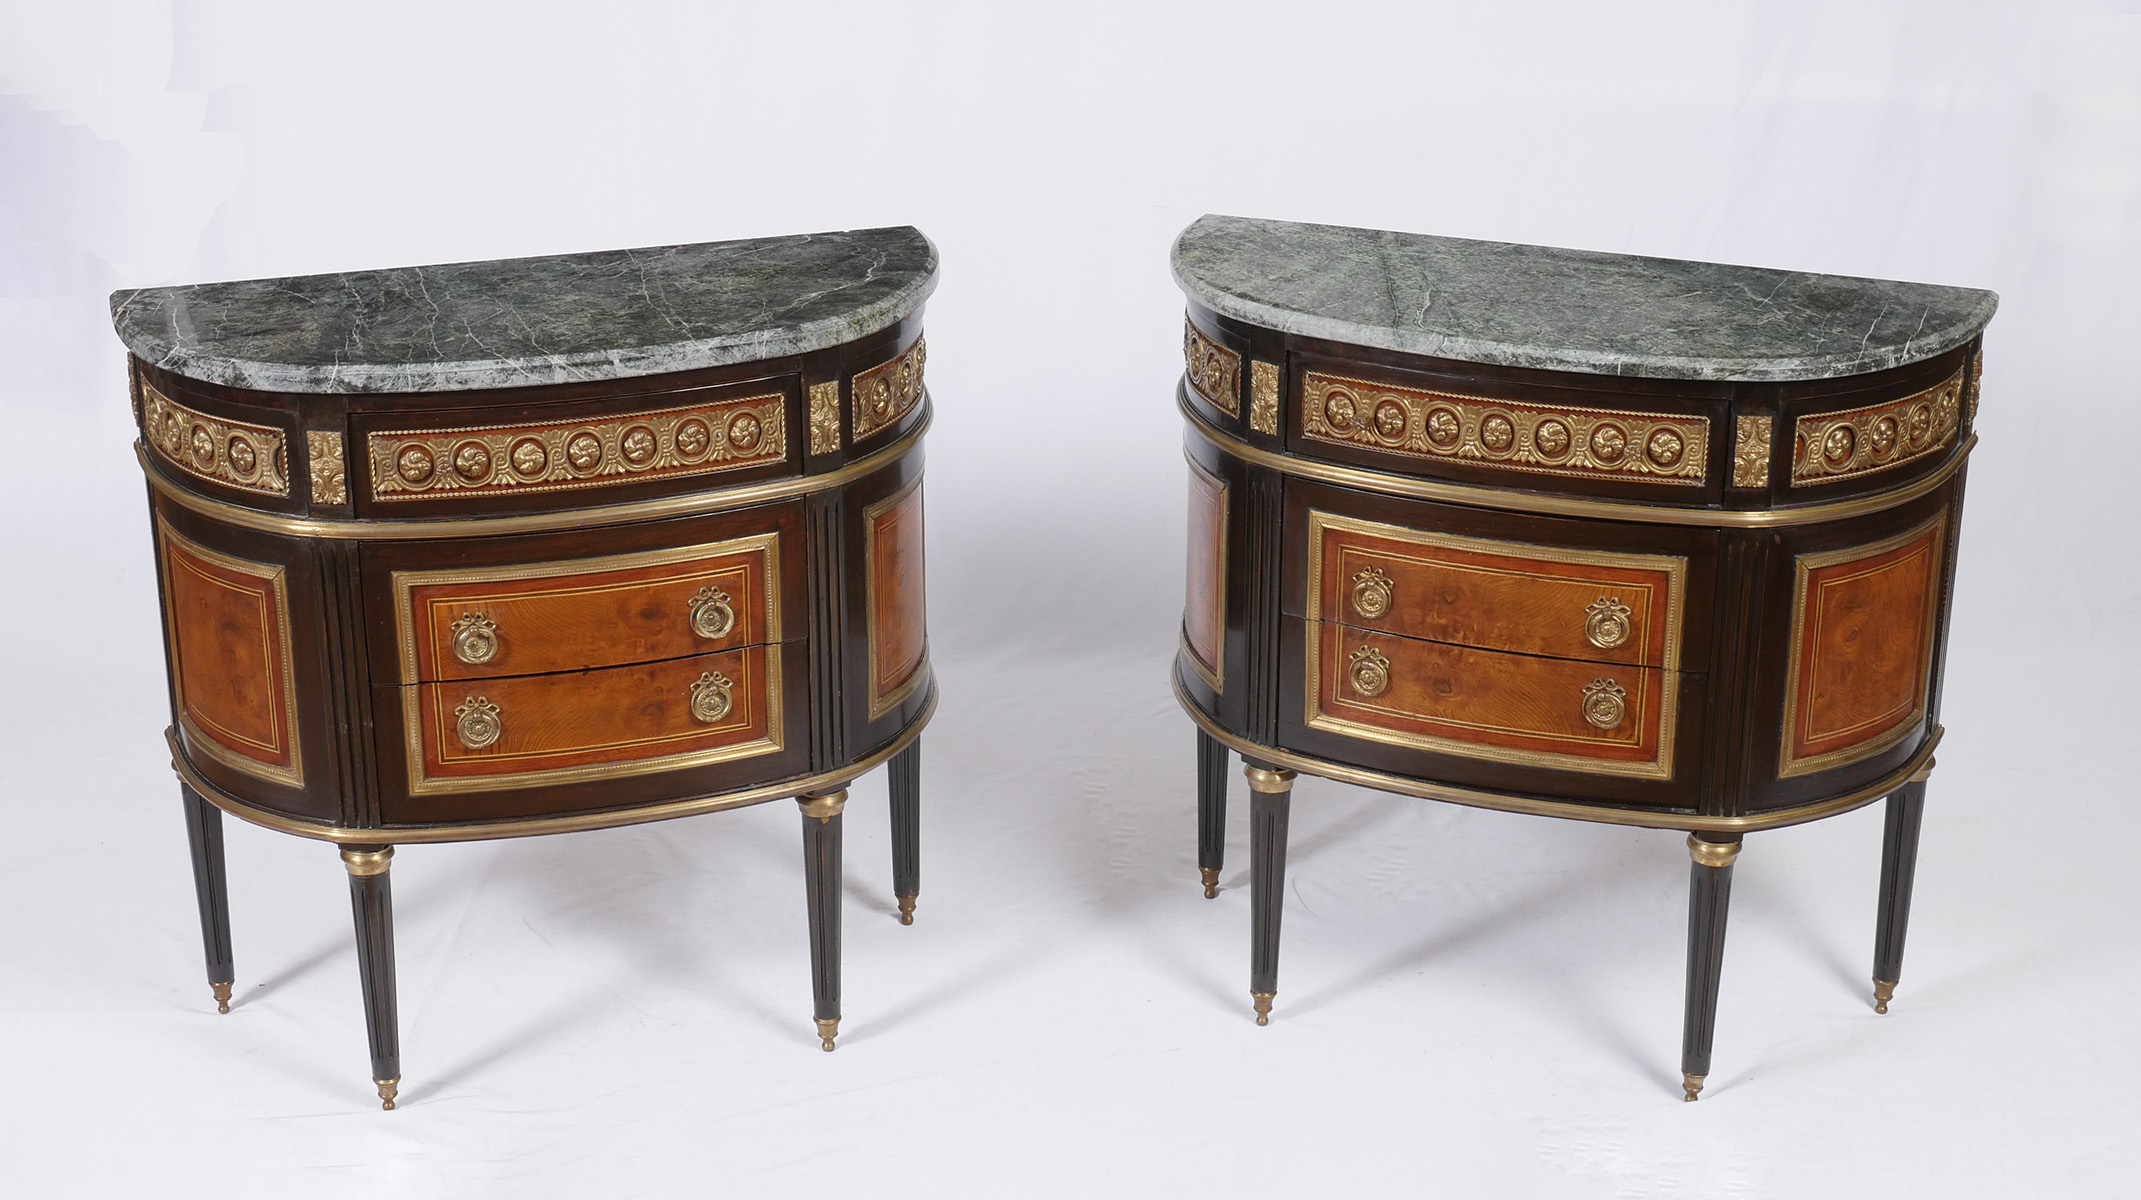 PAIR OF MARBLE TOP COMMODES: 2-beveled